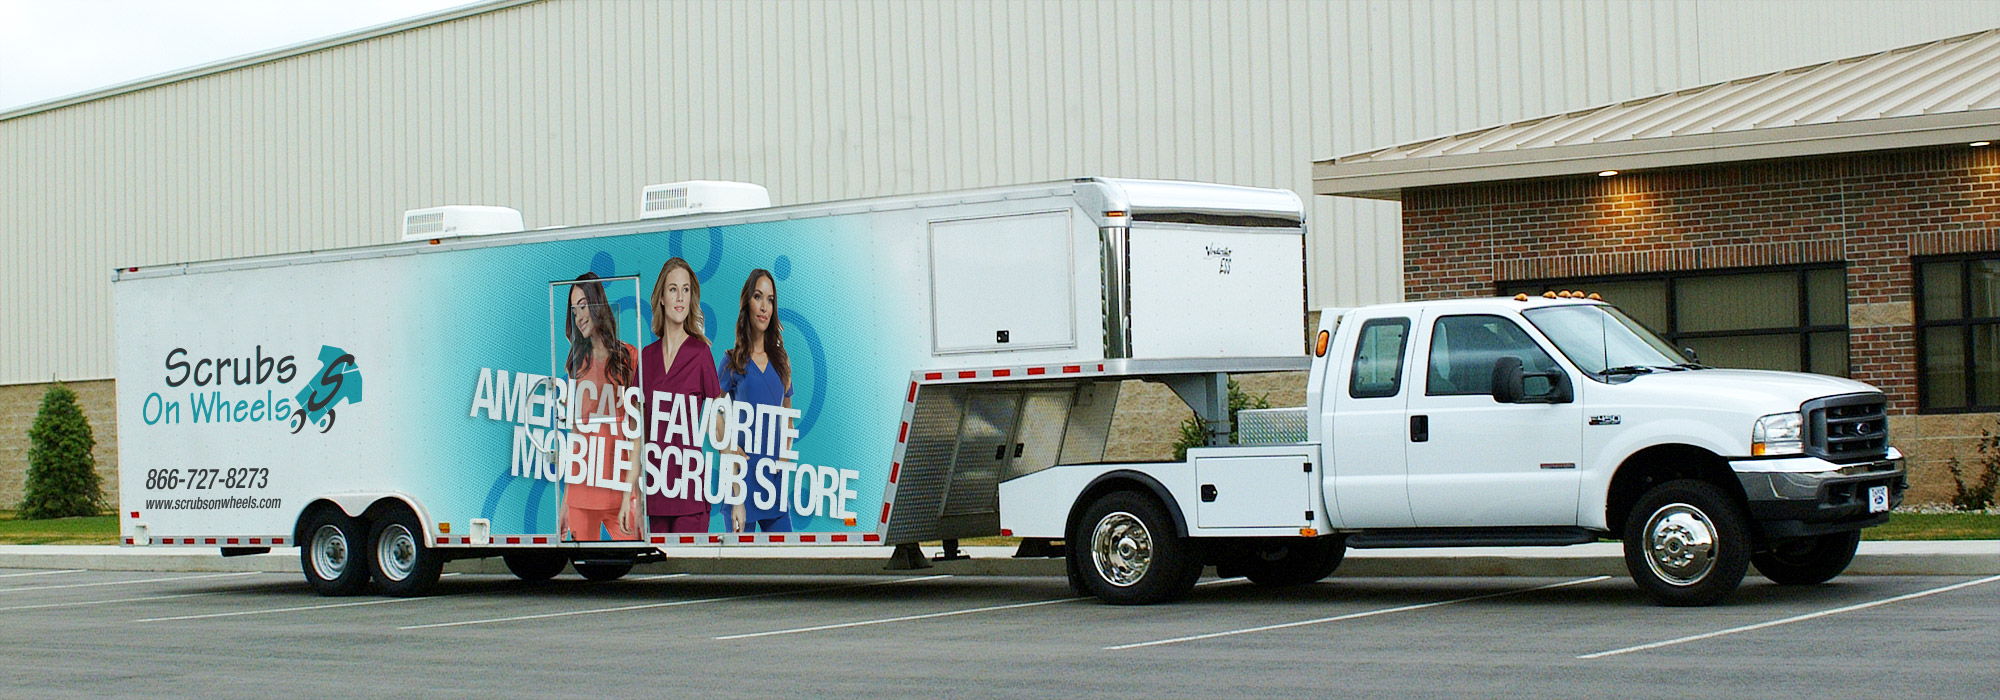 2016 Mobile Retail Truck